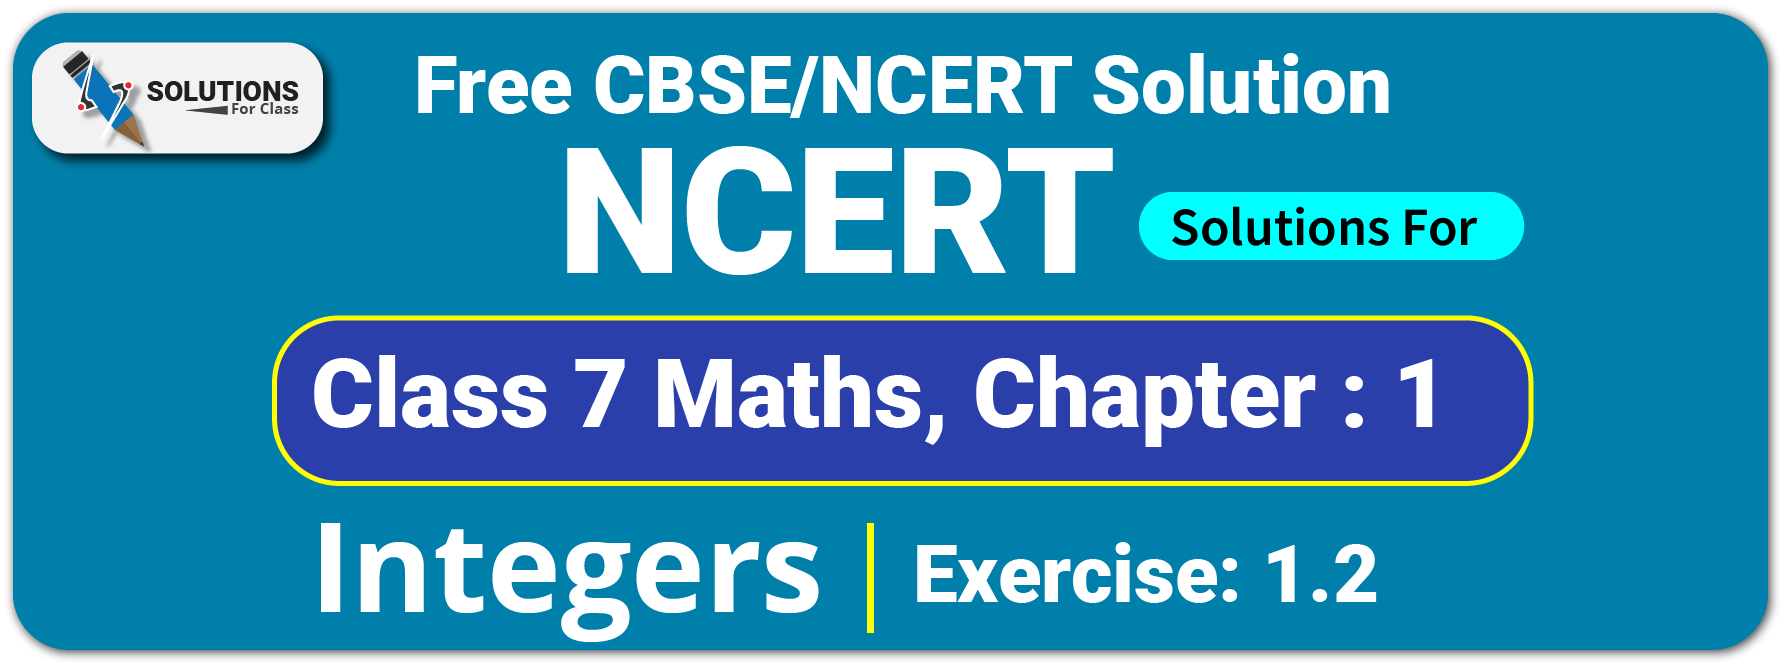 NCERT Solutions For Class 7 Chapter 1, Integers , Exercise 1.2